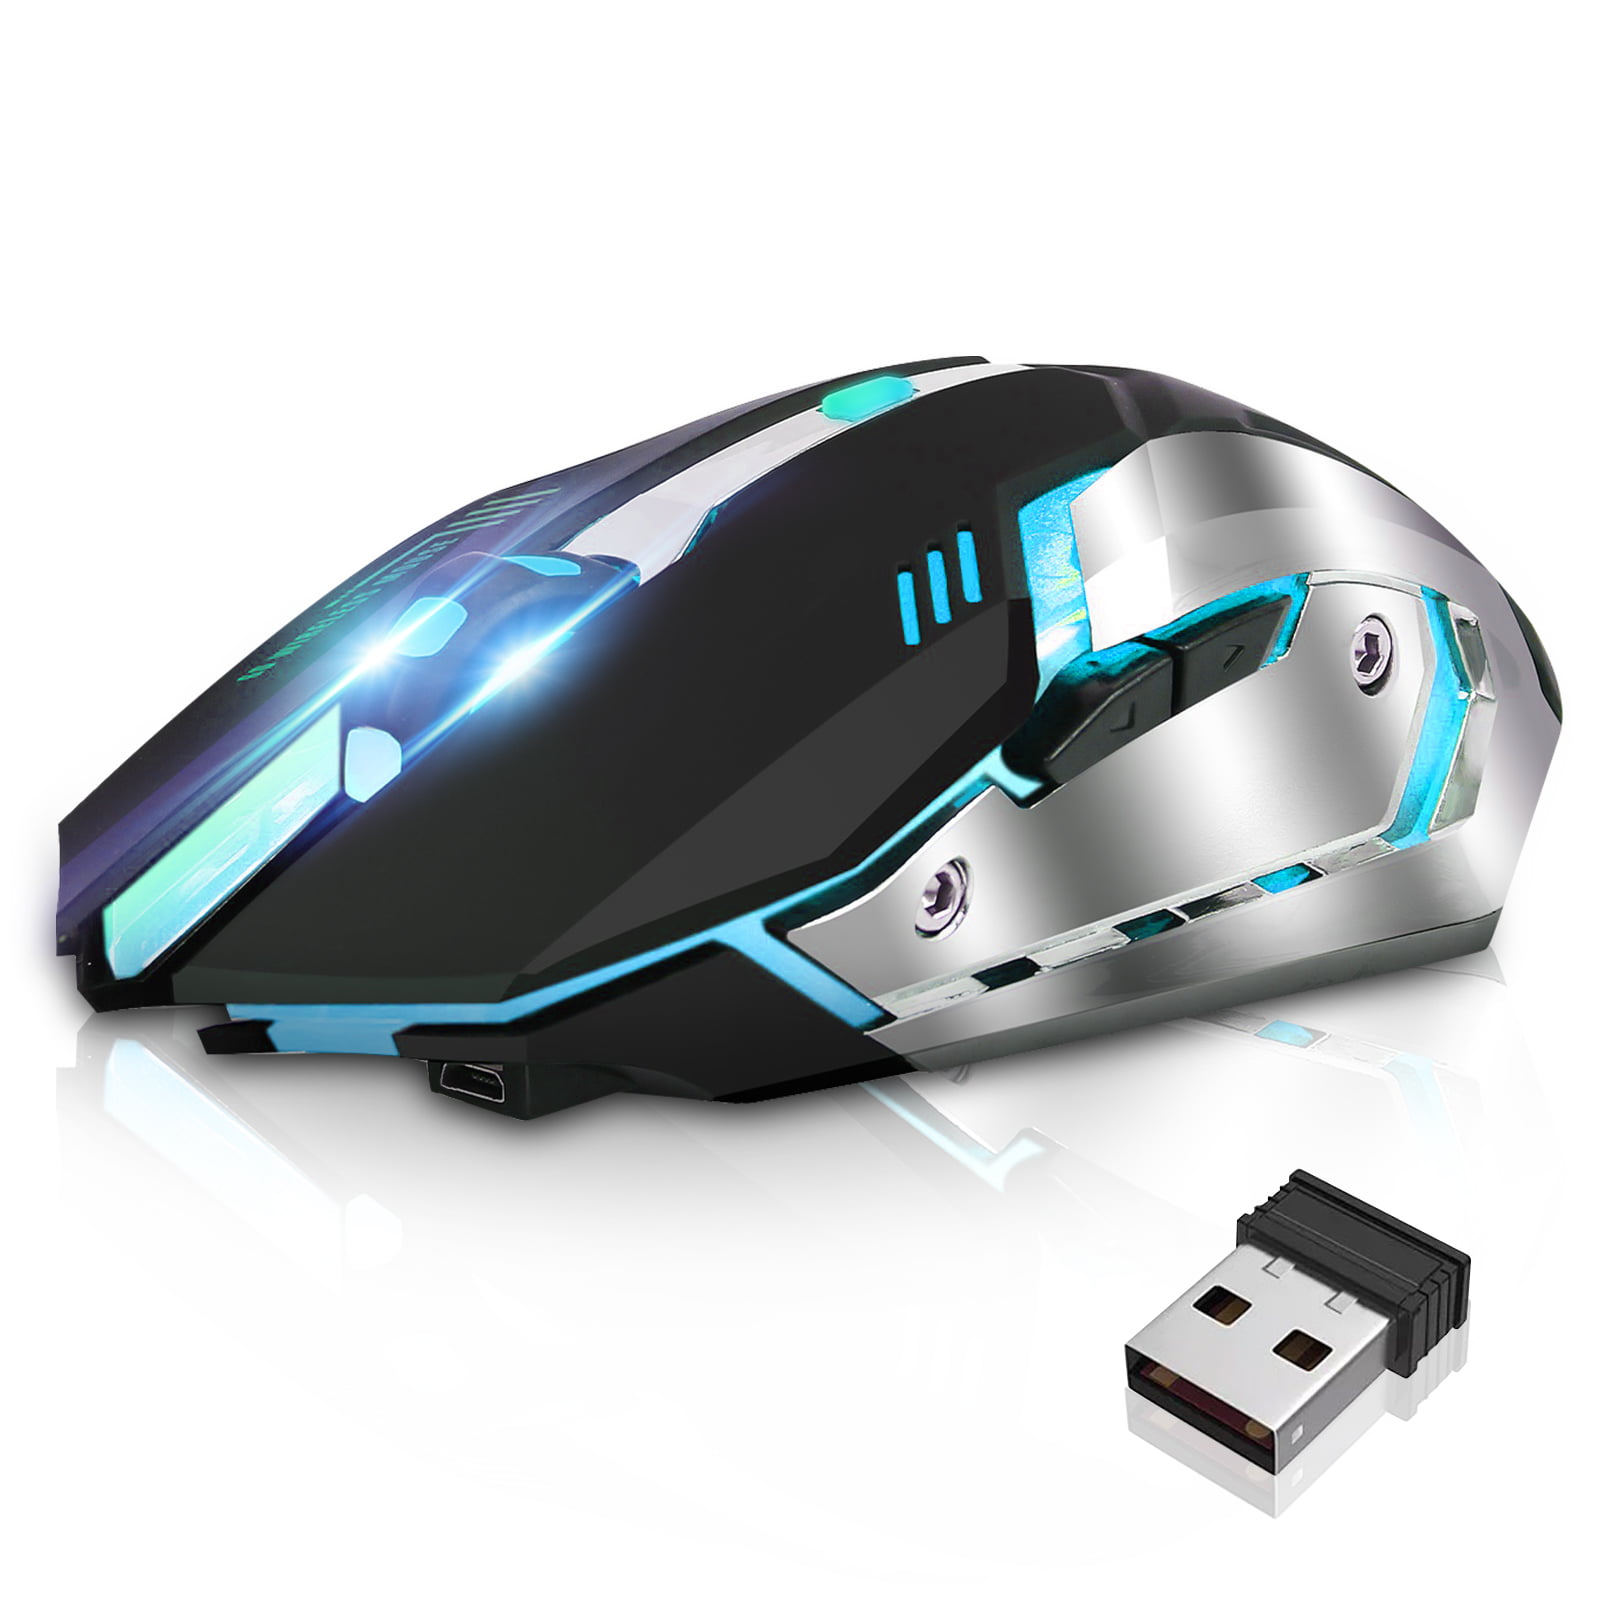 2.4G USB Optical Wireless Mouse 5 Buttons for Computer PC Laptop Gaming Mice Hot